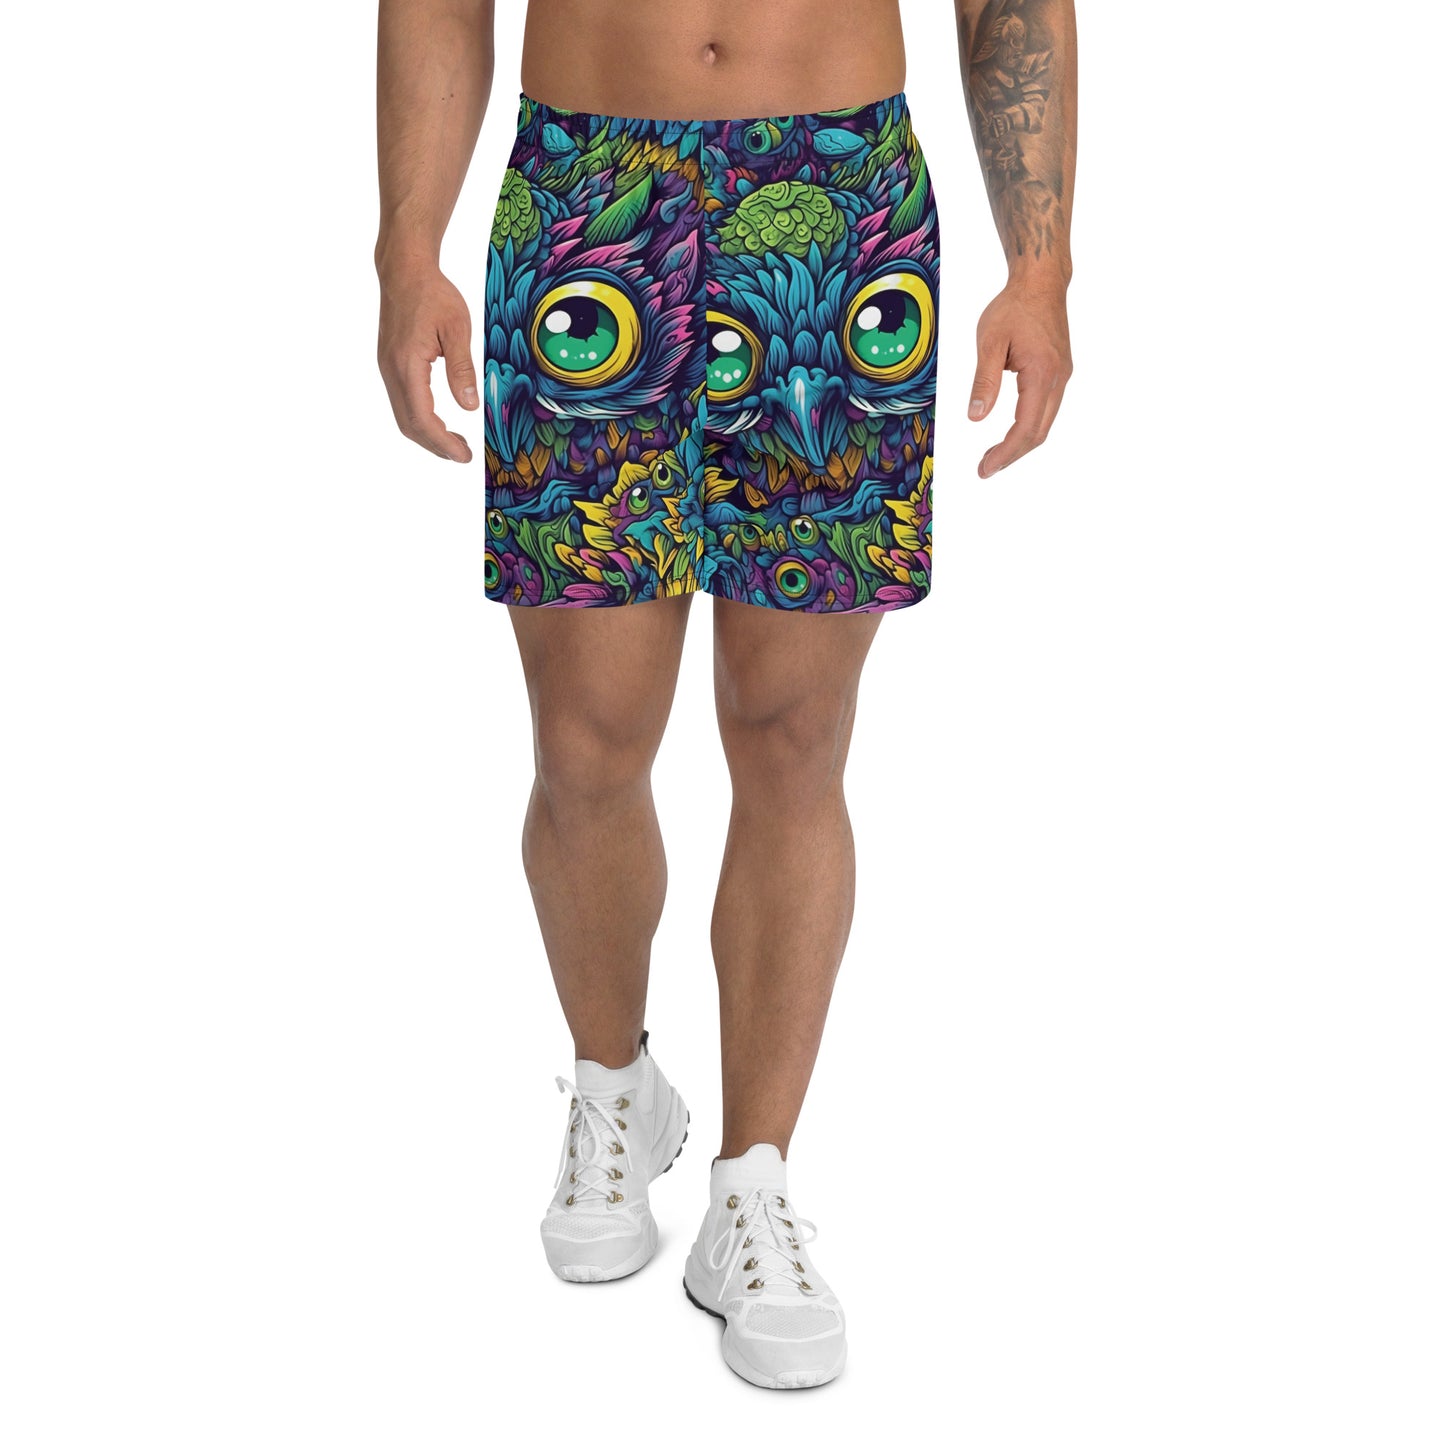 Trippy Owl Men's Recycled Athletic Shorts